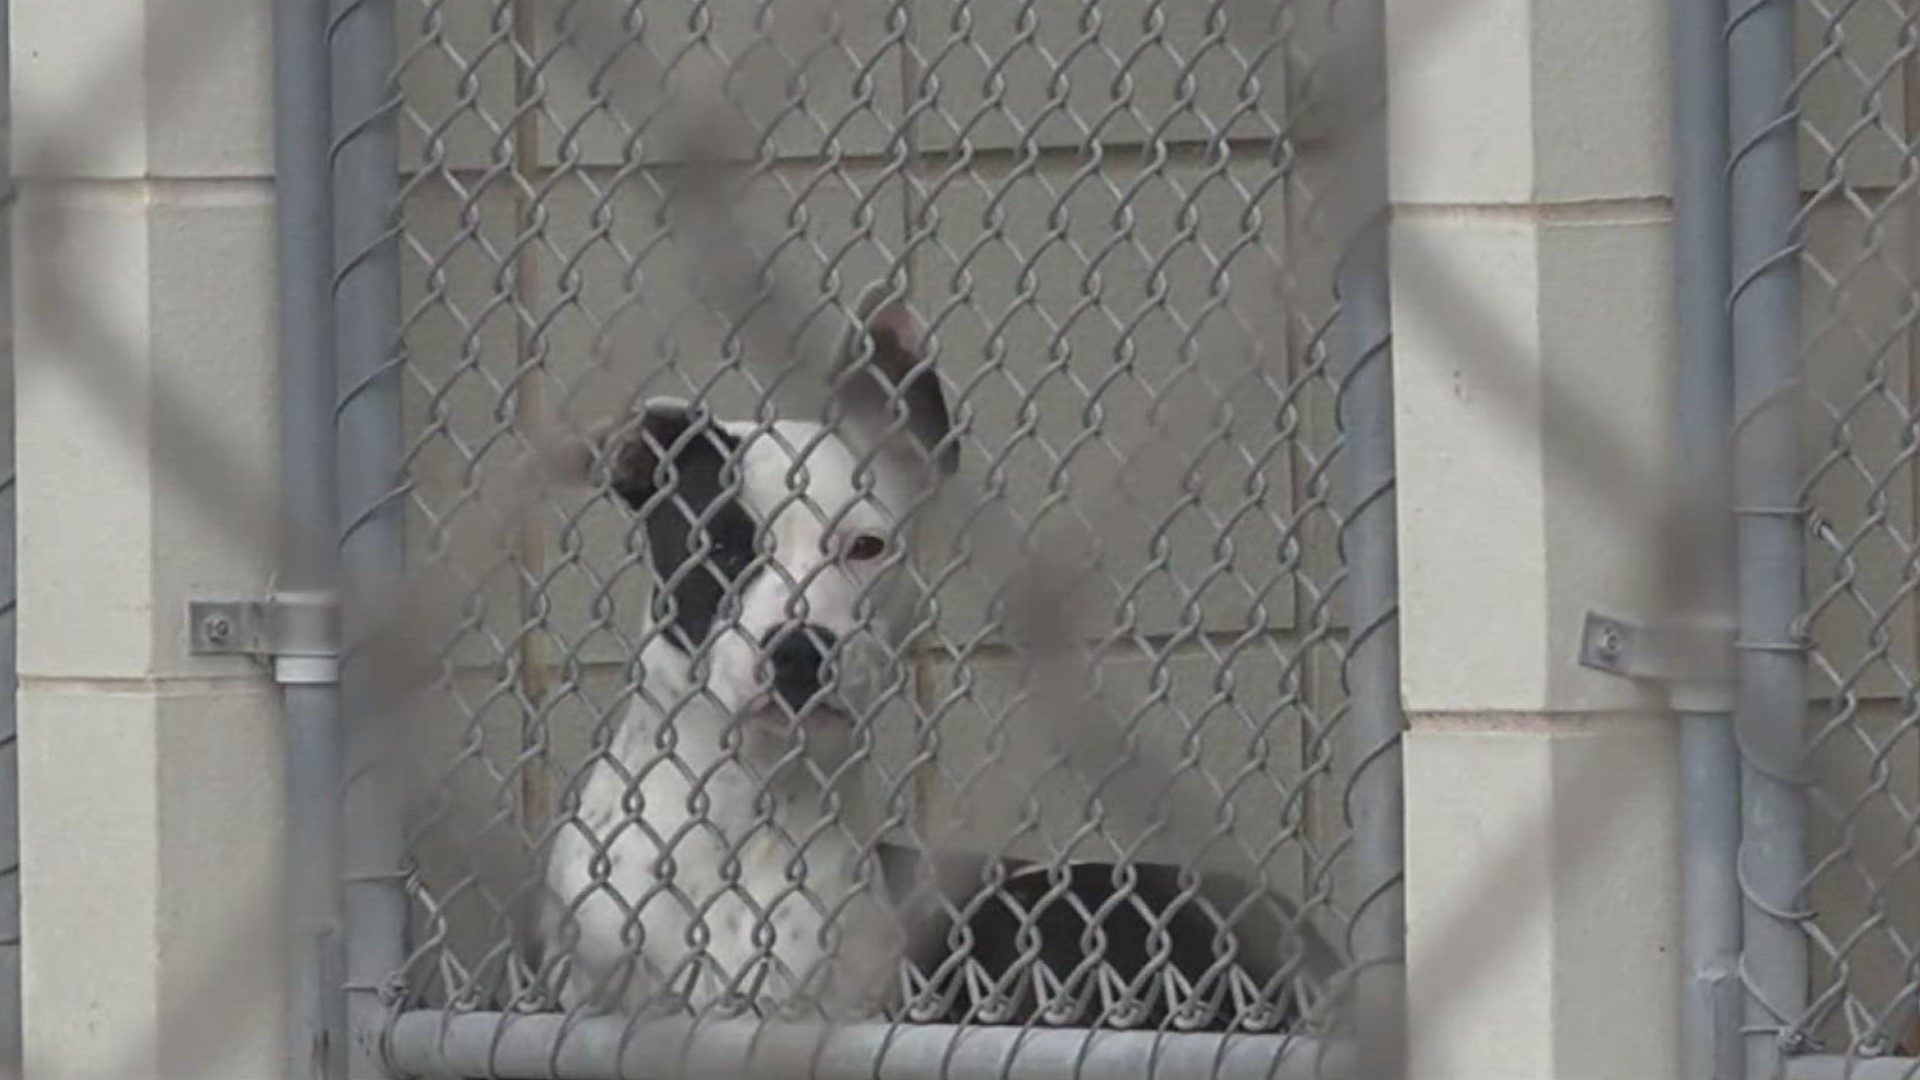 ACS is asking people to consider short-term fostering shelter pets to make more space for an influx of stray animals expected to be rescued when temperatures drop.